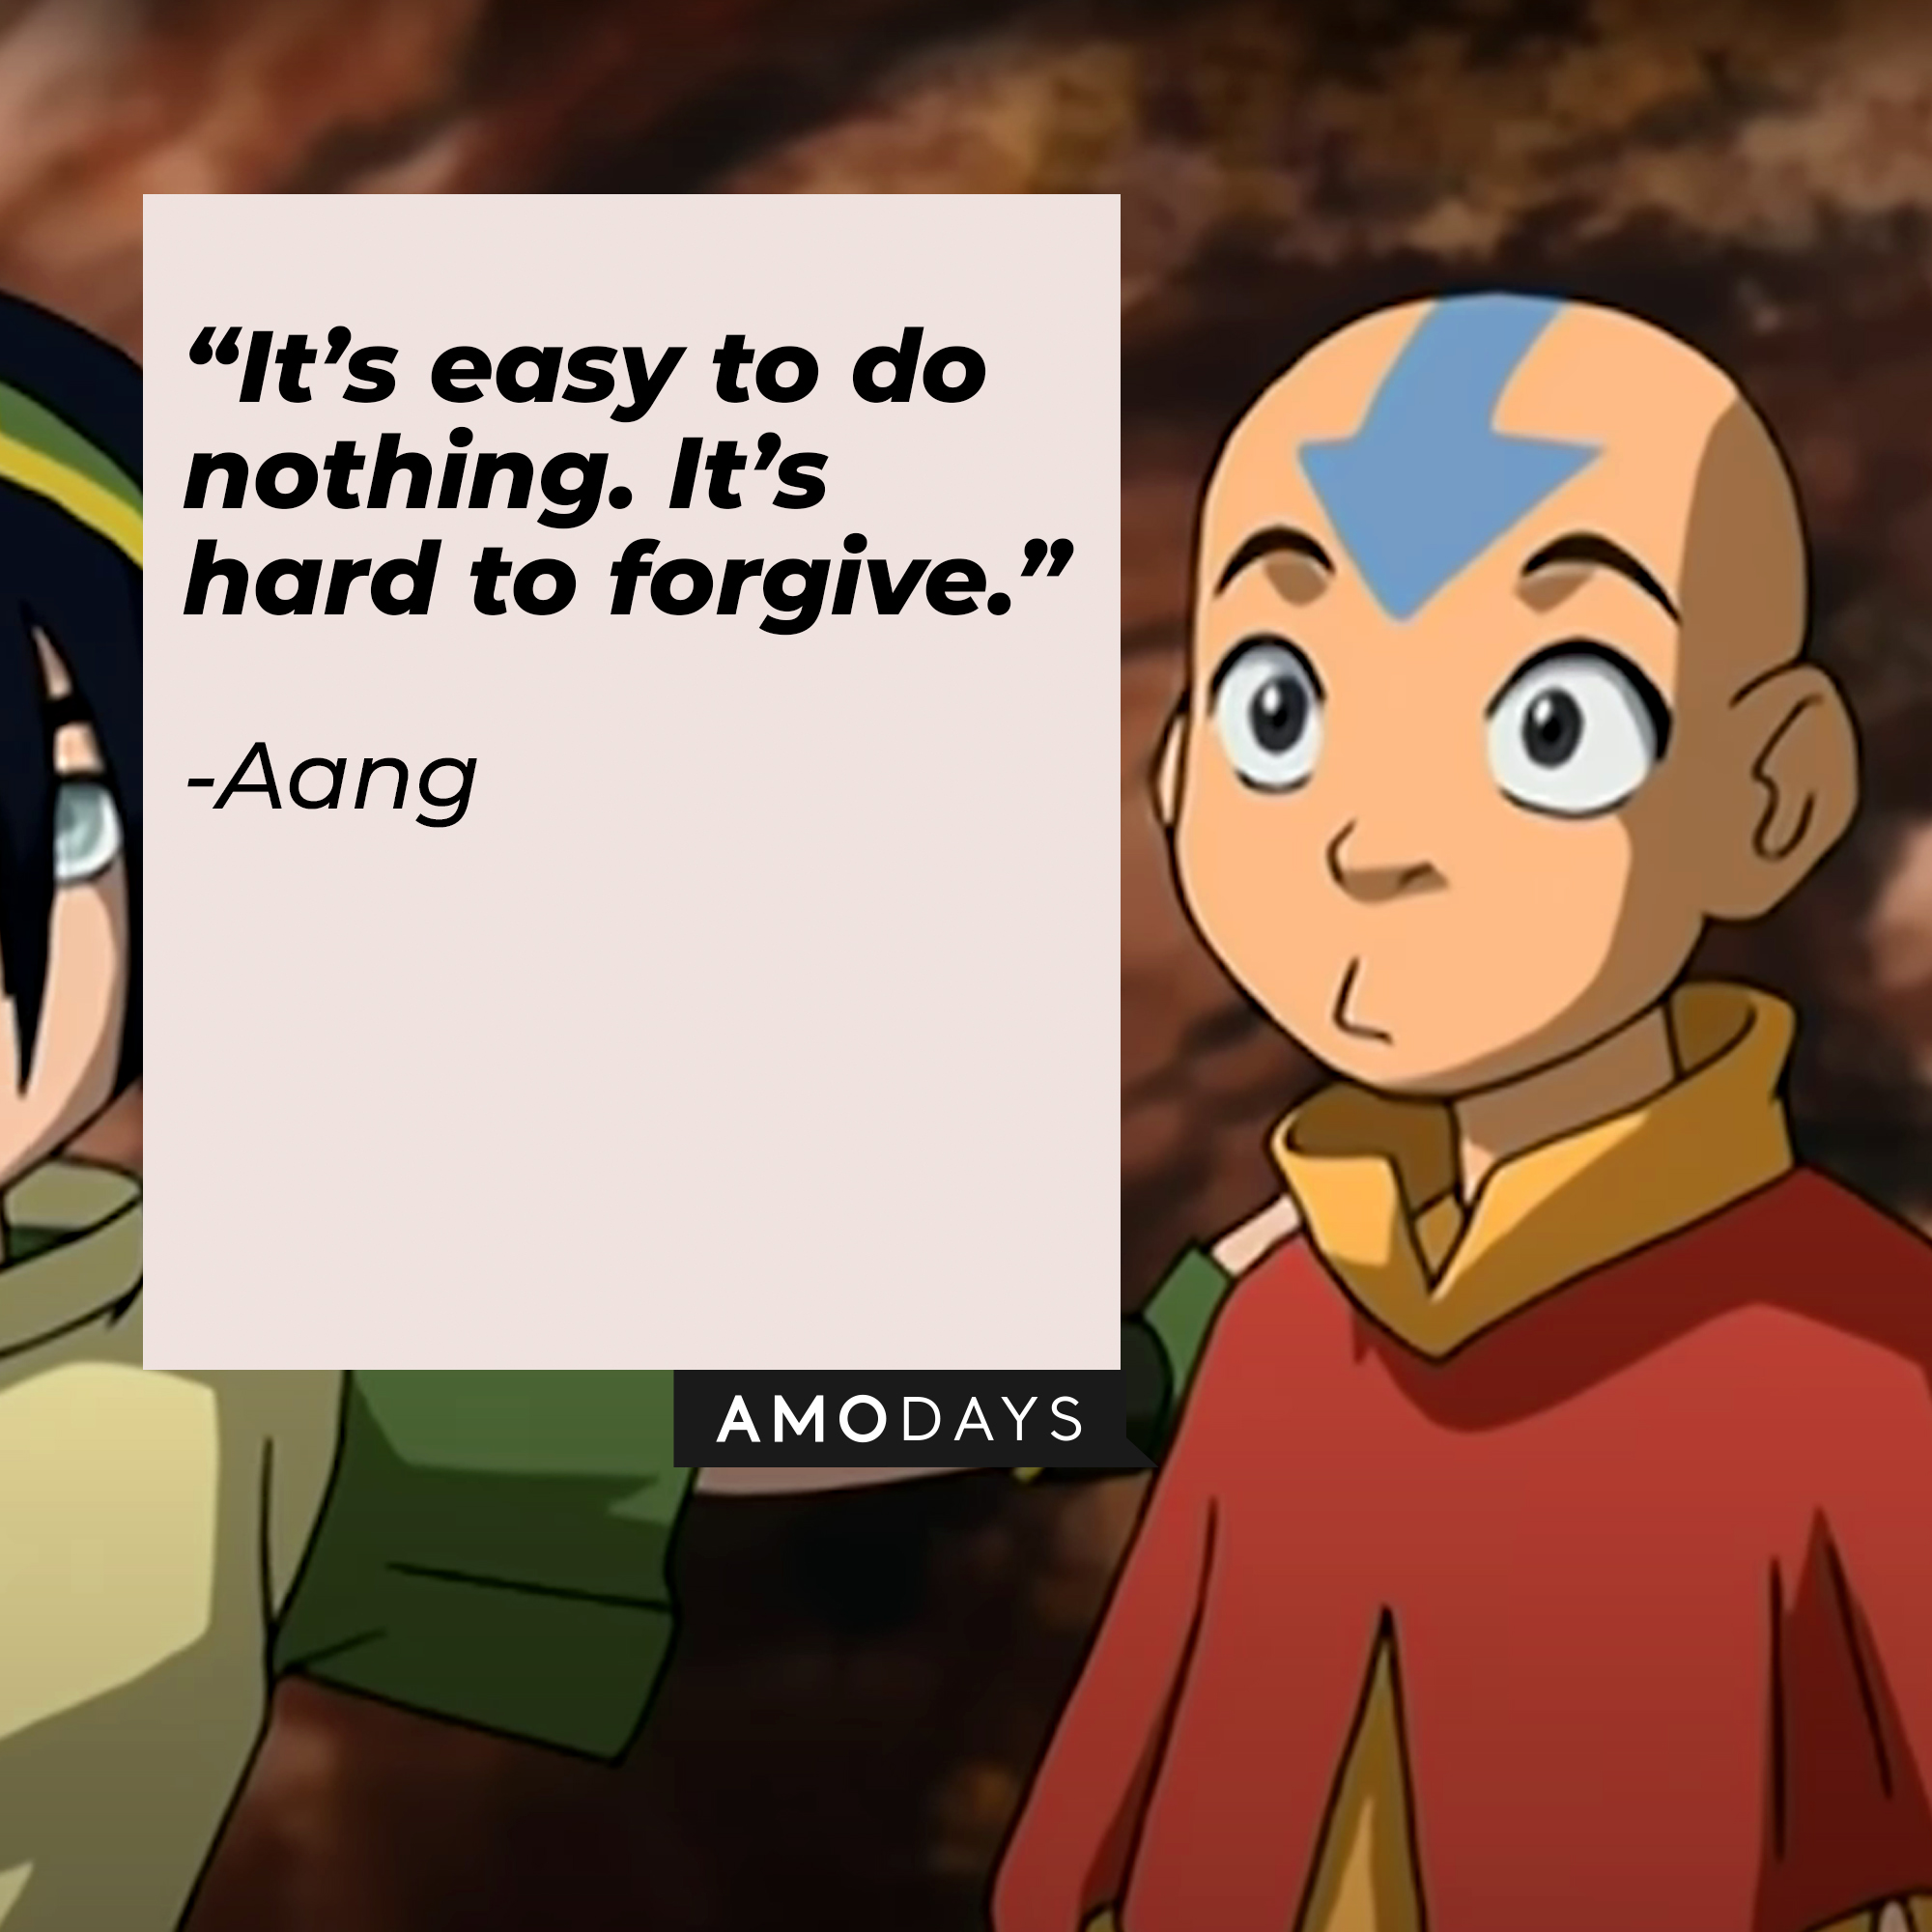 Aang’s quote: “It’s easy to do nothing. It’s hard to forgive.” | Source: Youtube.com/TeamAvatar